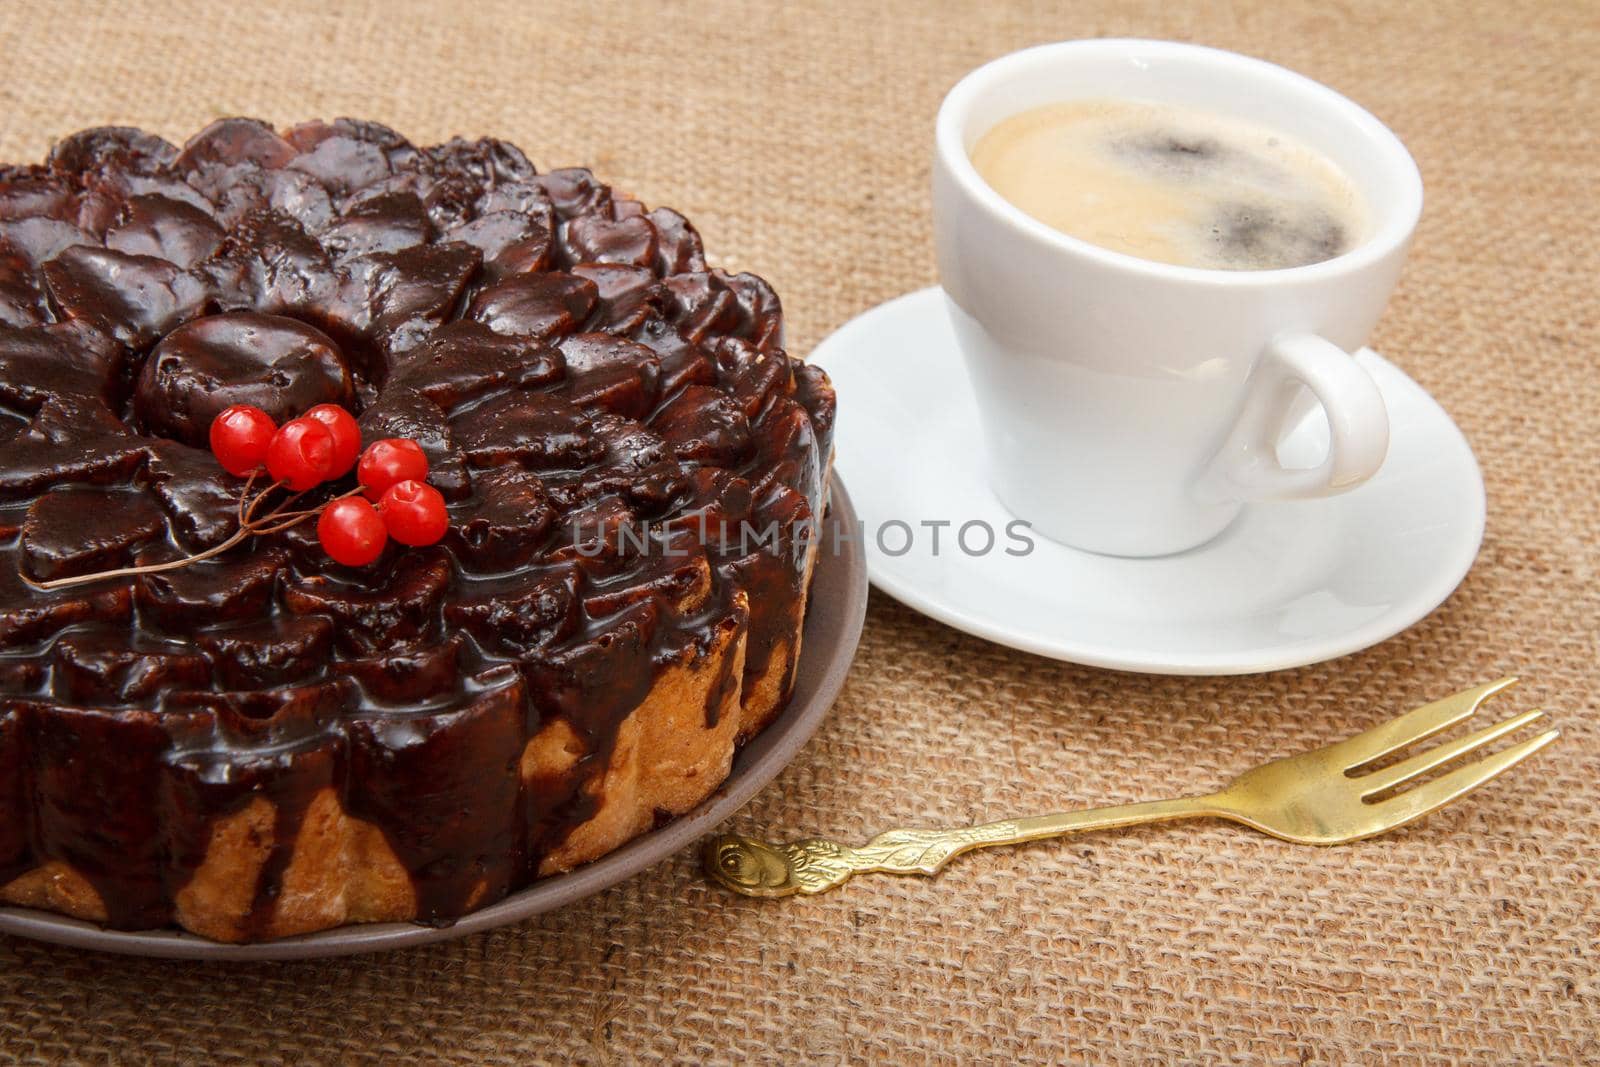 Chocolate cake decorated with bunch of viburnum, fork and cup of coffee beside it on table with sackcloth